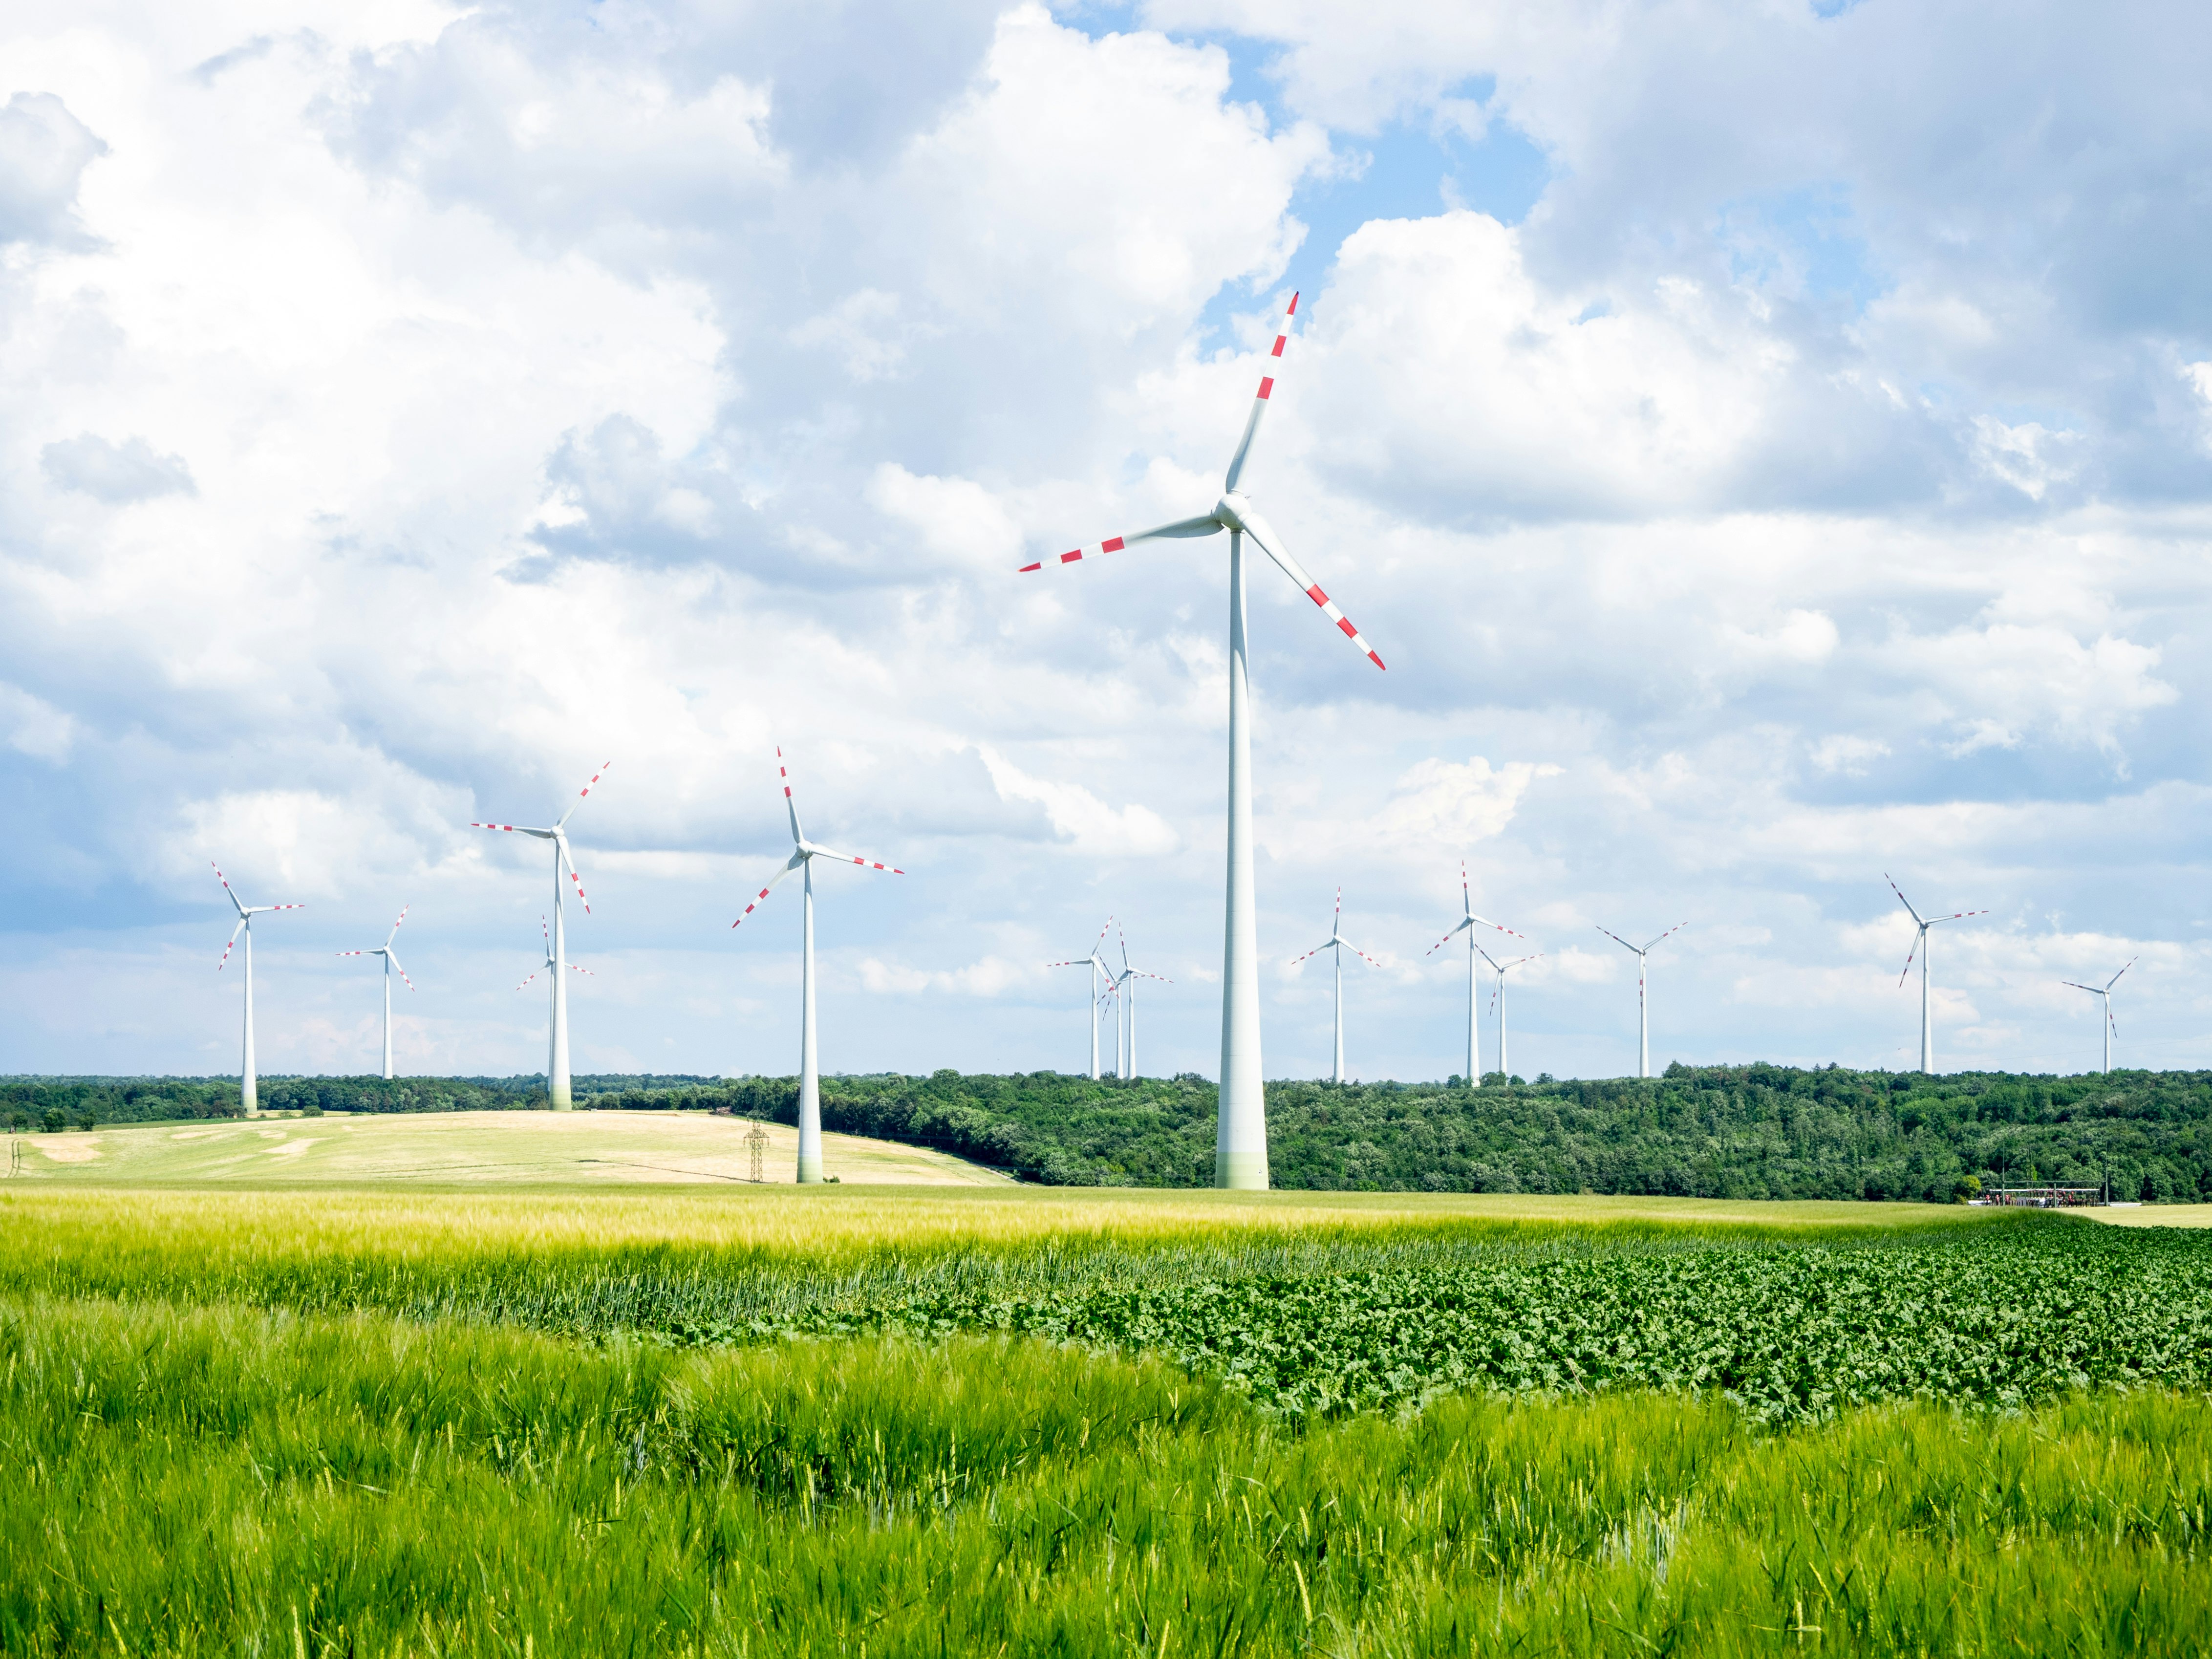 white wind turbines on green grass field under white clouds and blue sky during daytime